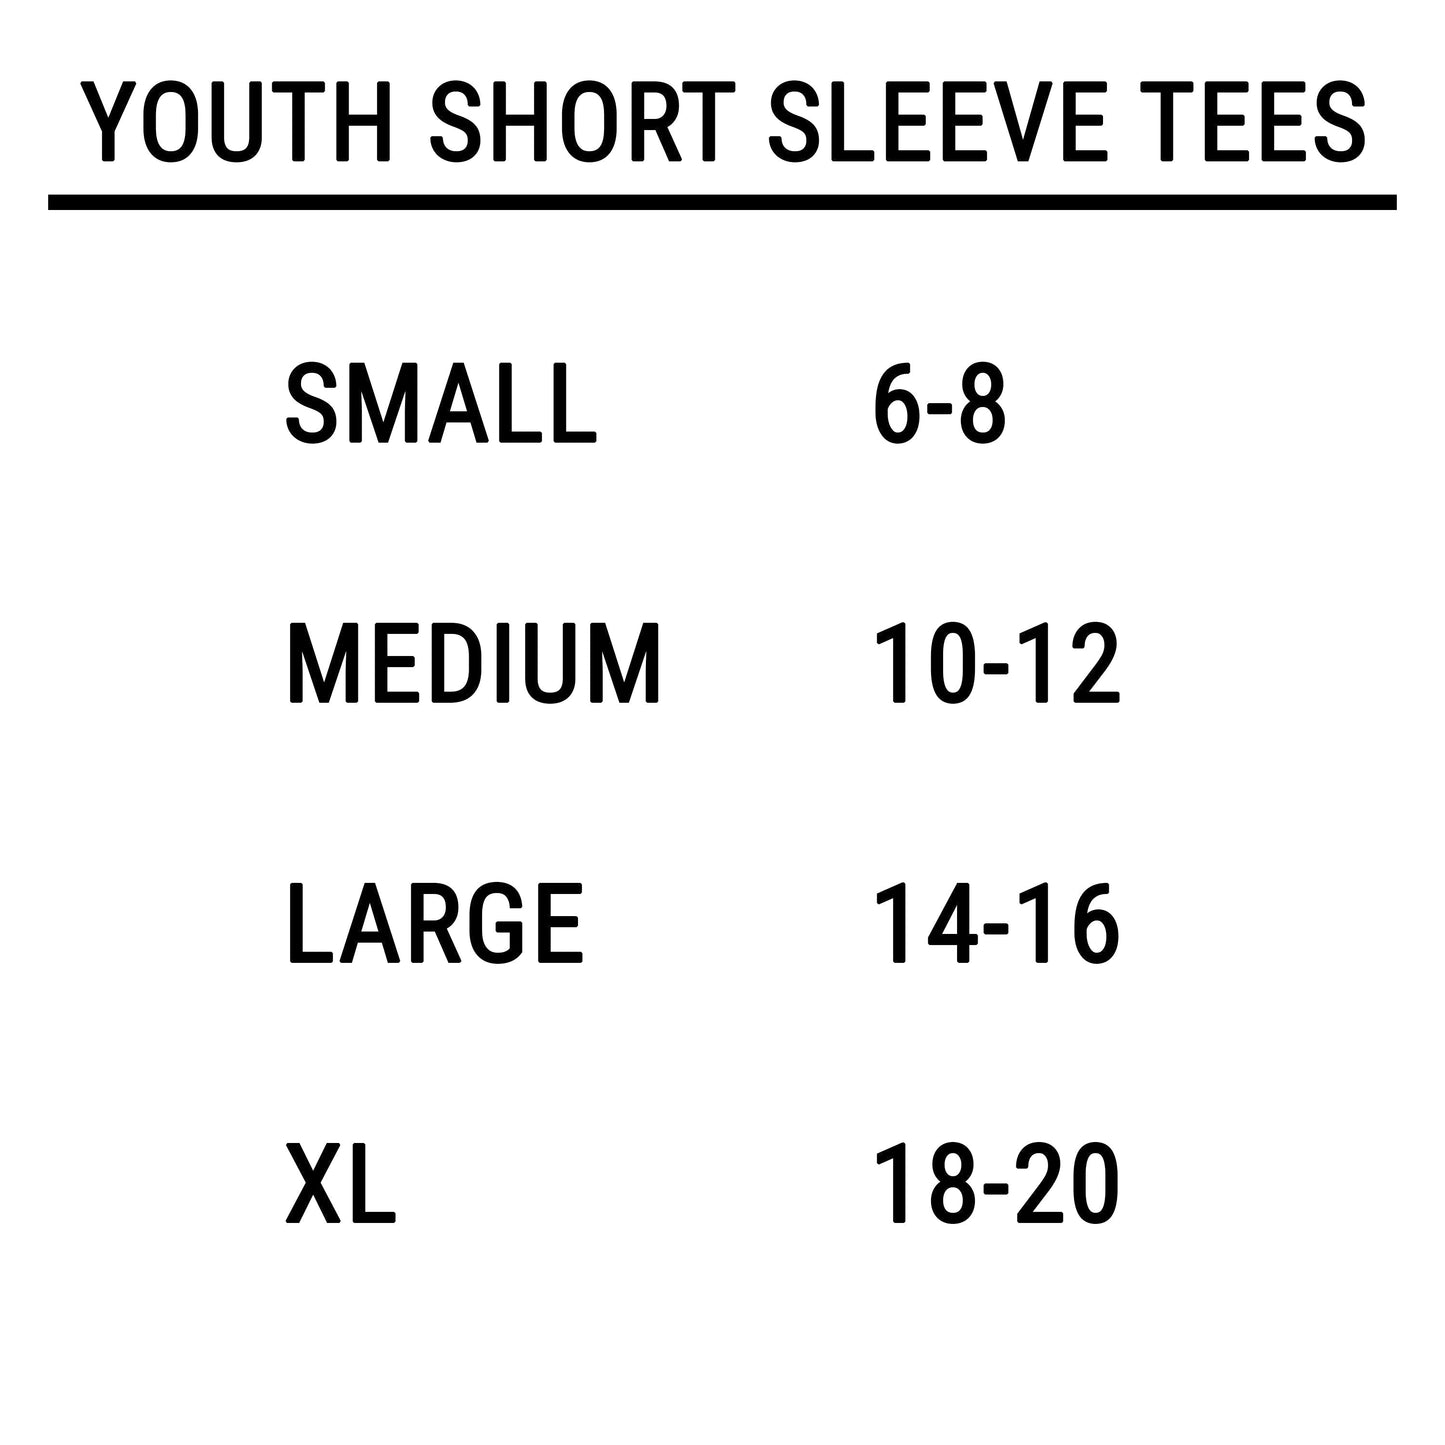 Sixth Grade Flowers | Youth Graphic Short Sleeve Tee